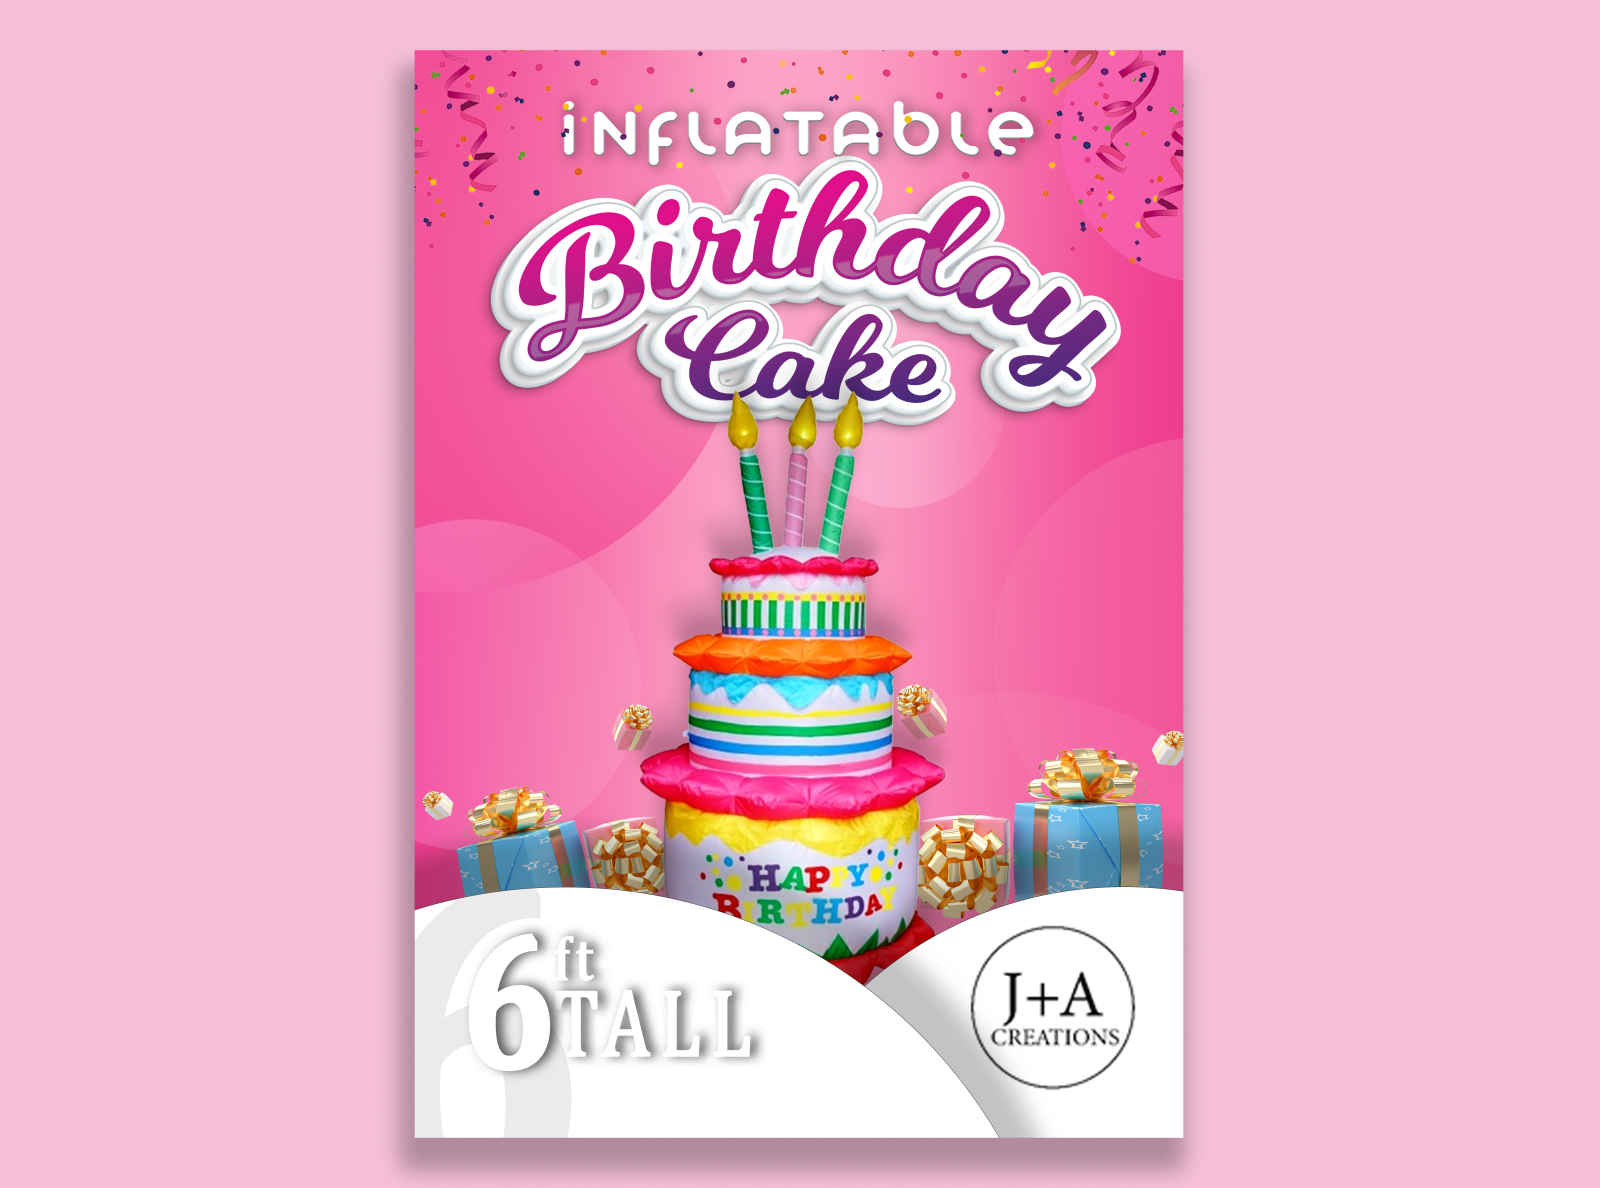 Vintage Chocolate Cake Poster Design Stock Vector (Royalty Free) 158856791  | Shutterstock